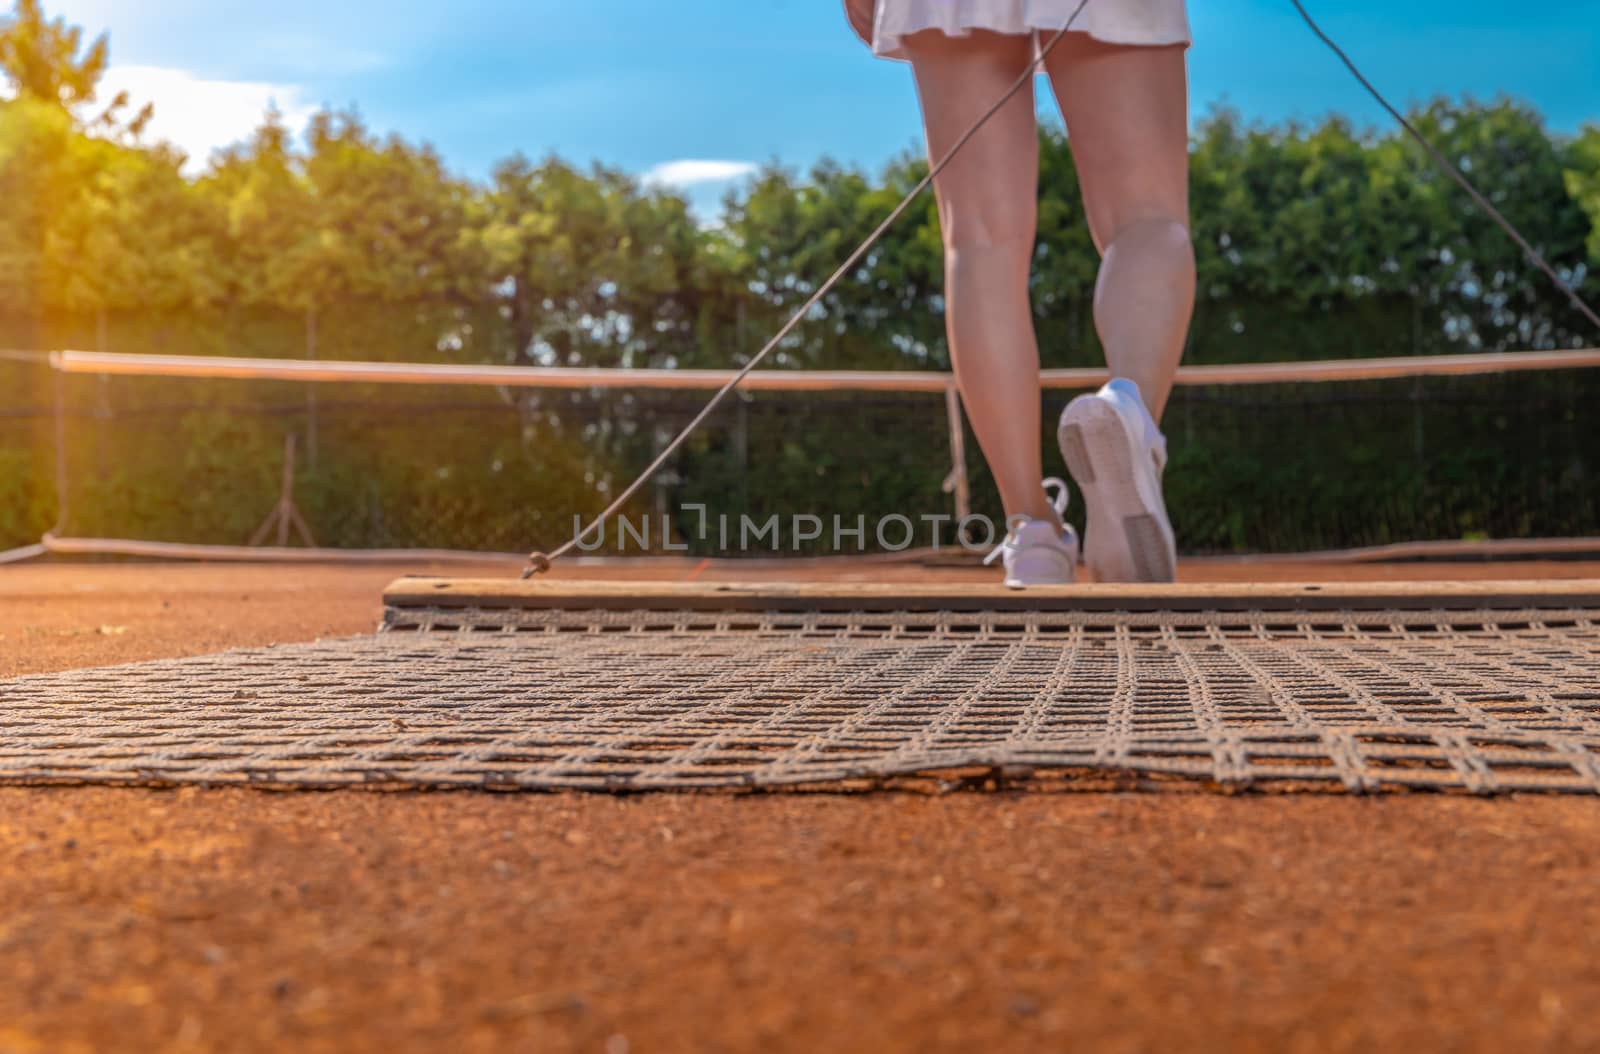 sweeping orange clay on an outdoor tennis court. copy space by Edophoto